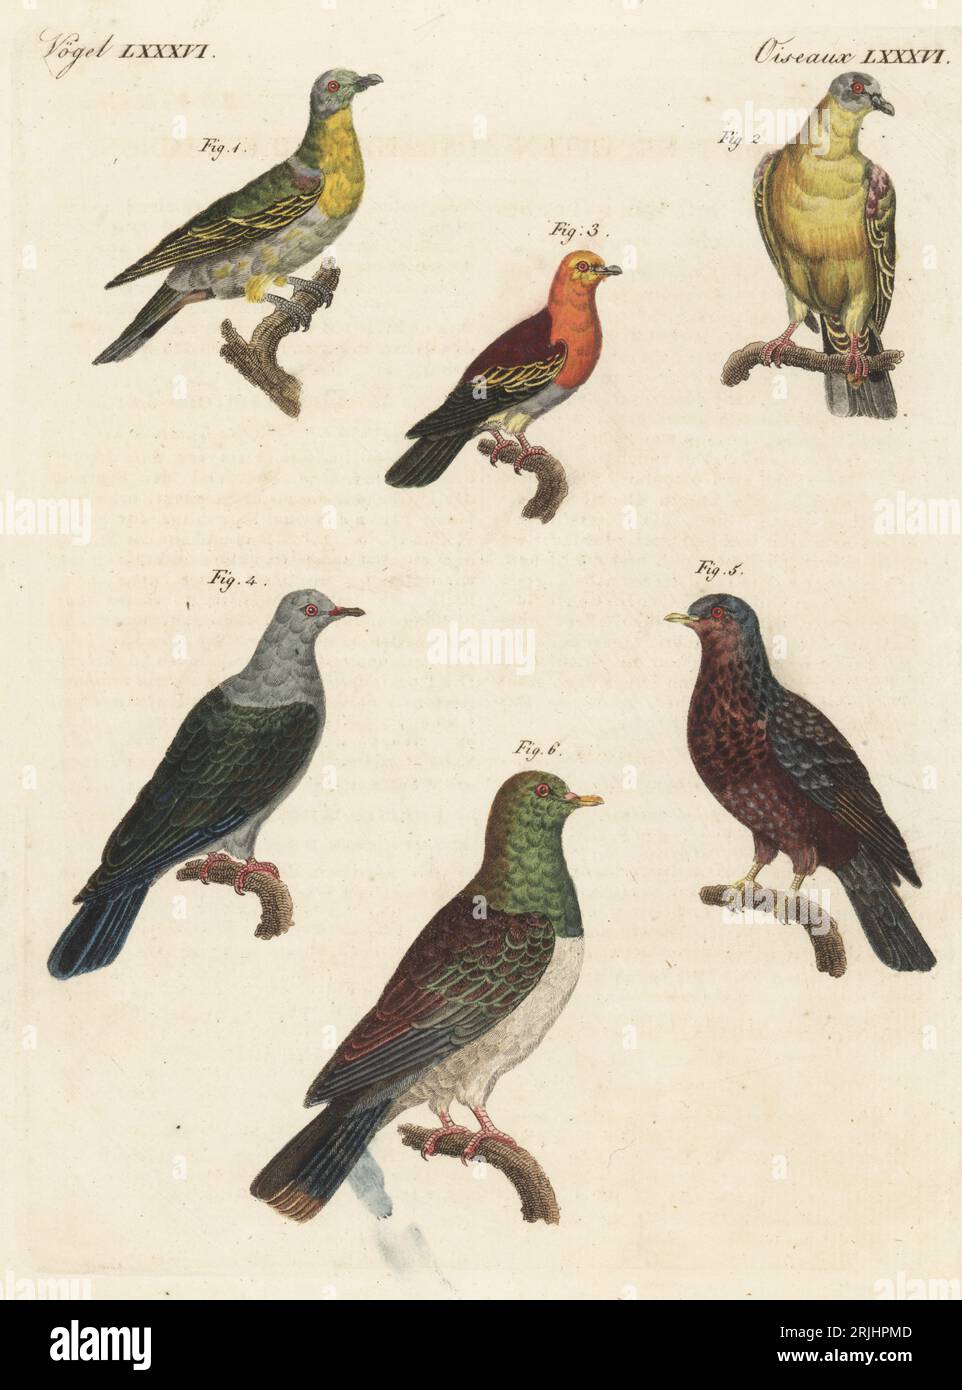 Yellow-footed green pigeon, Treron phoenicopterus, male 1, female 2, Buru green pigeon, Treron aromaticus 3, Green imperial pigeon, Ducula aenea 4, African olive pigeon,  Columba arquatrix 5 and extinct Norfolk Island pigeon, Hemiphaga spadicea 6. Copied from Madame Pauline Knip's Les Pigeons, 1811. Handcoloured copperplate engraving from Carl Bertuch's Bilderbuch fur Kinder (Picture Book for Children), Weimar, 1813. A 12-volume encyclopedia for children illustrated with almost 1,200 engraved plates on natural history, science, costume, mythology, etc., published from 1790-1830. Stock Photo